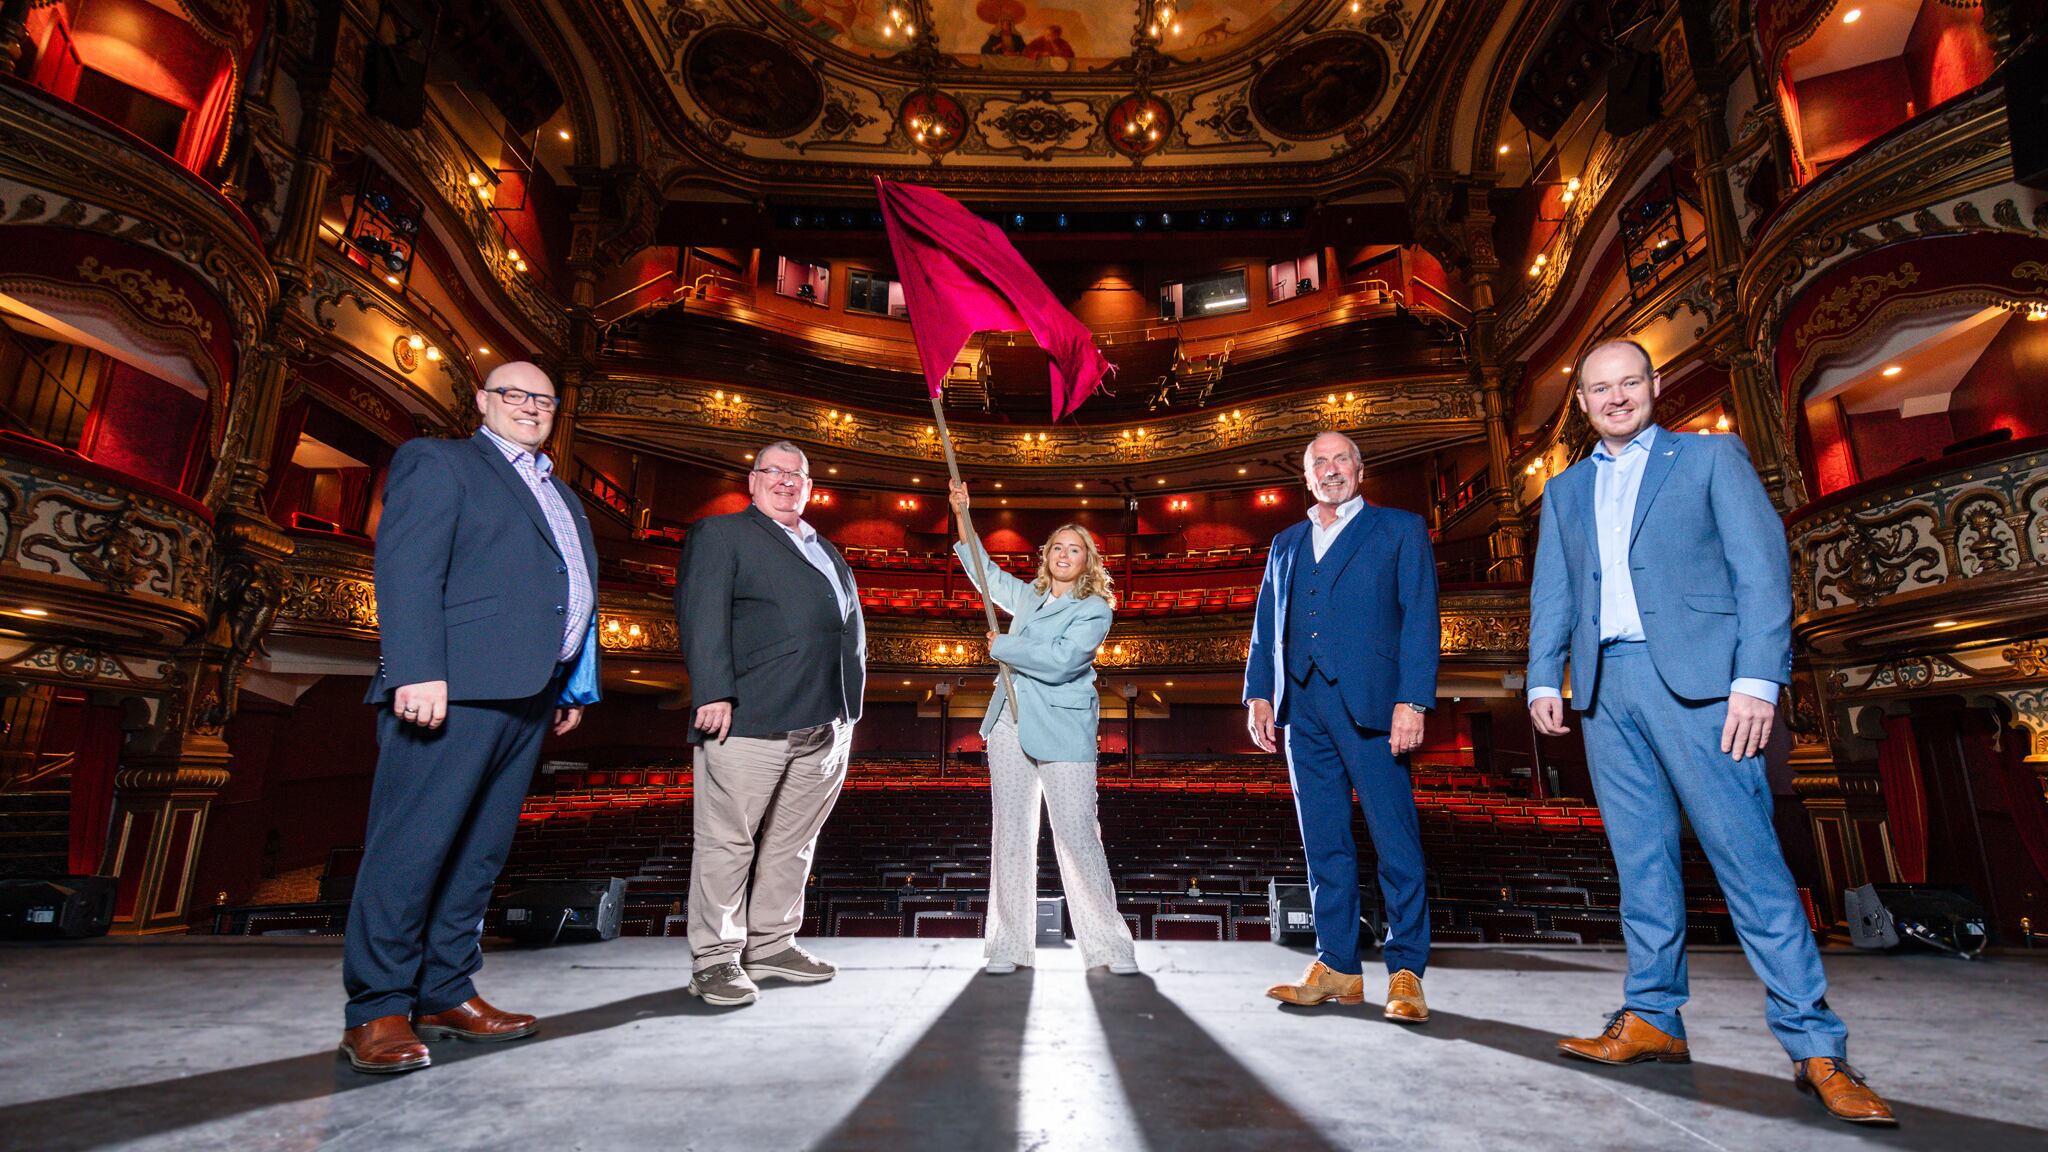 Grand Opera House's Ian Wilson, Gareth Maxwell of the Ulster Operatic Company, Director of Les Misérables Kerry Rodgers, Colin Boyd of the Belfast Operatic Company and Gareth McGreevy of the St Agnes’ Choral Society